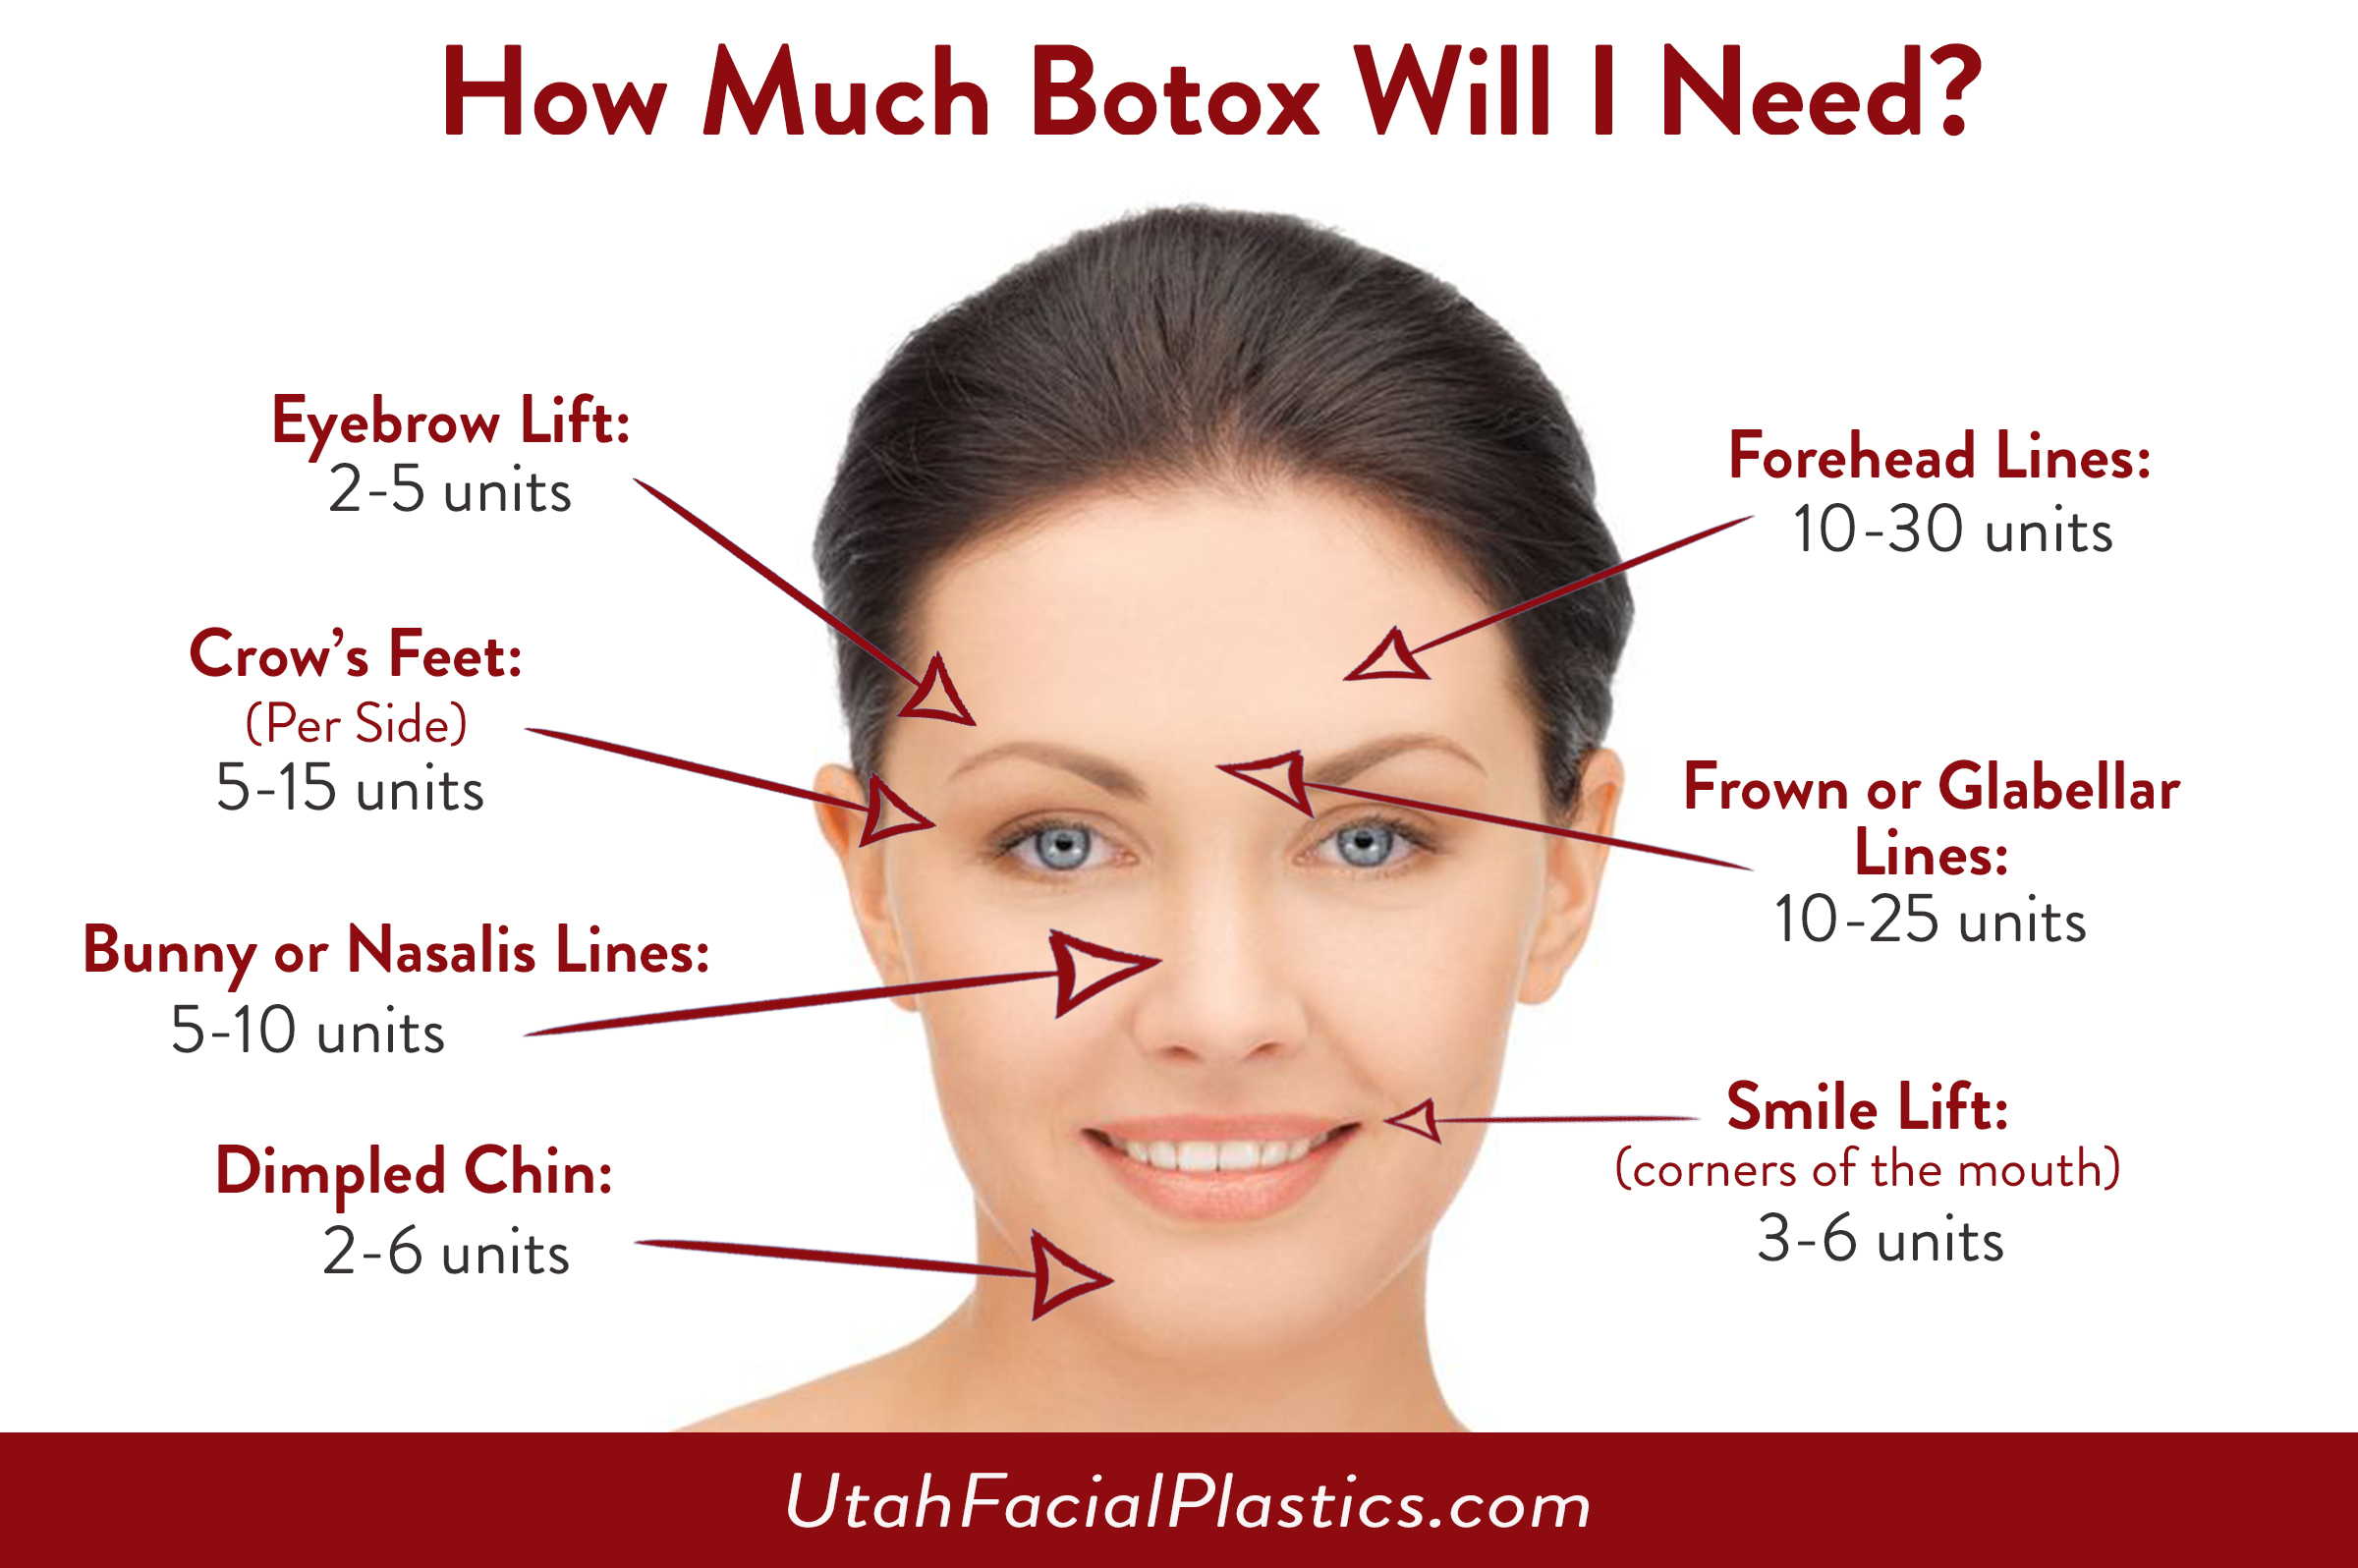 How much botox will you need